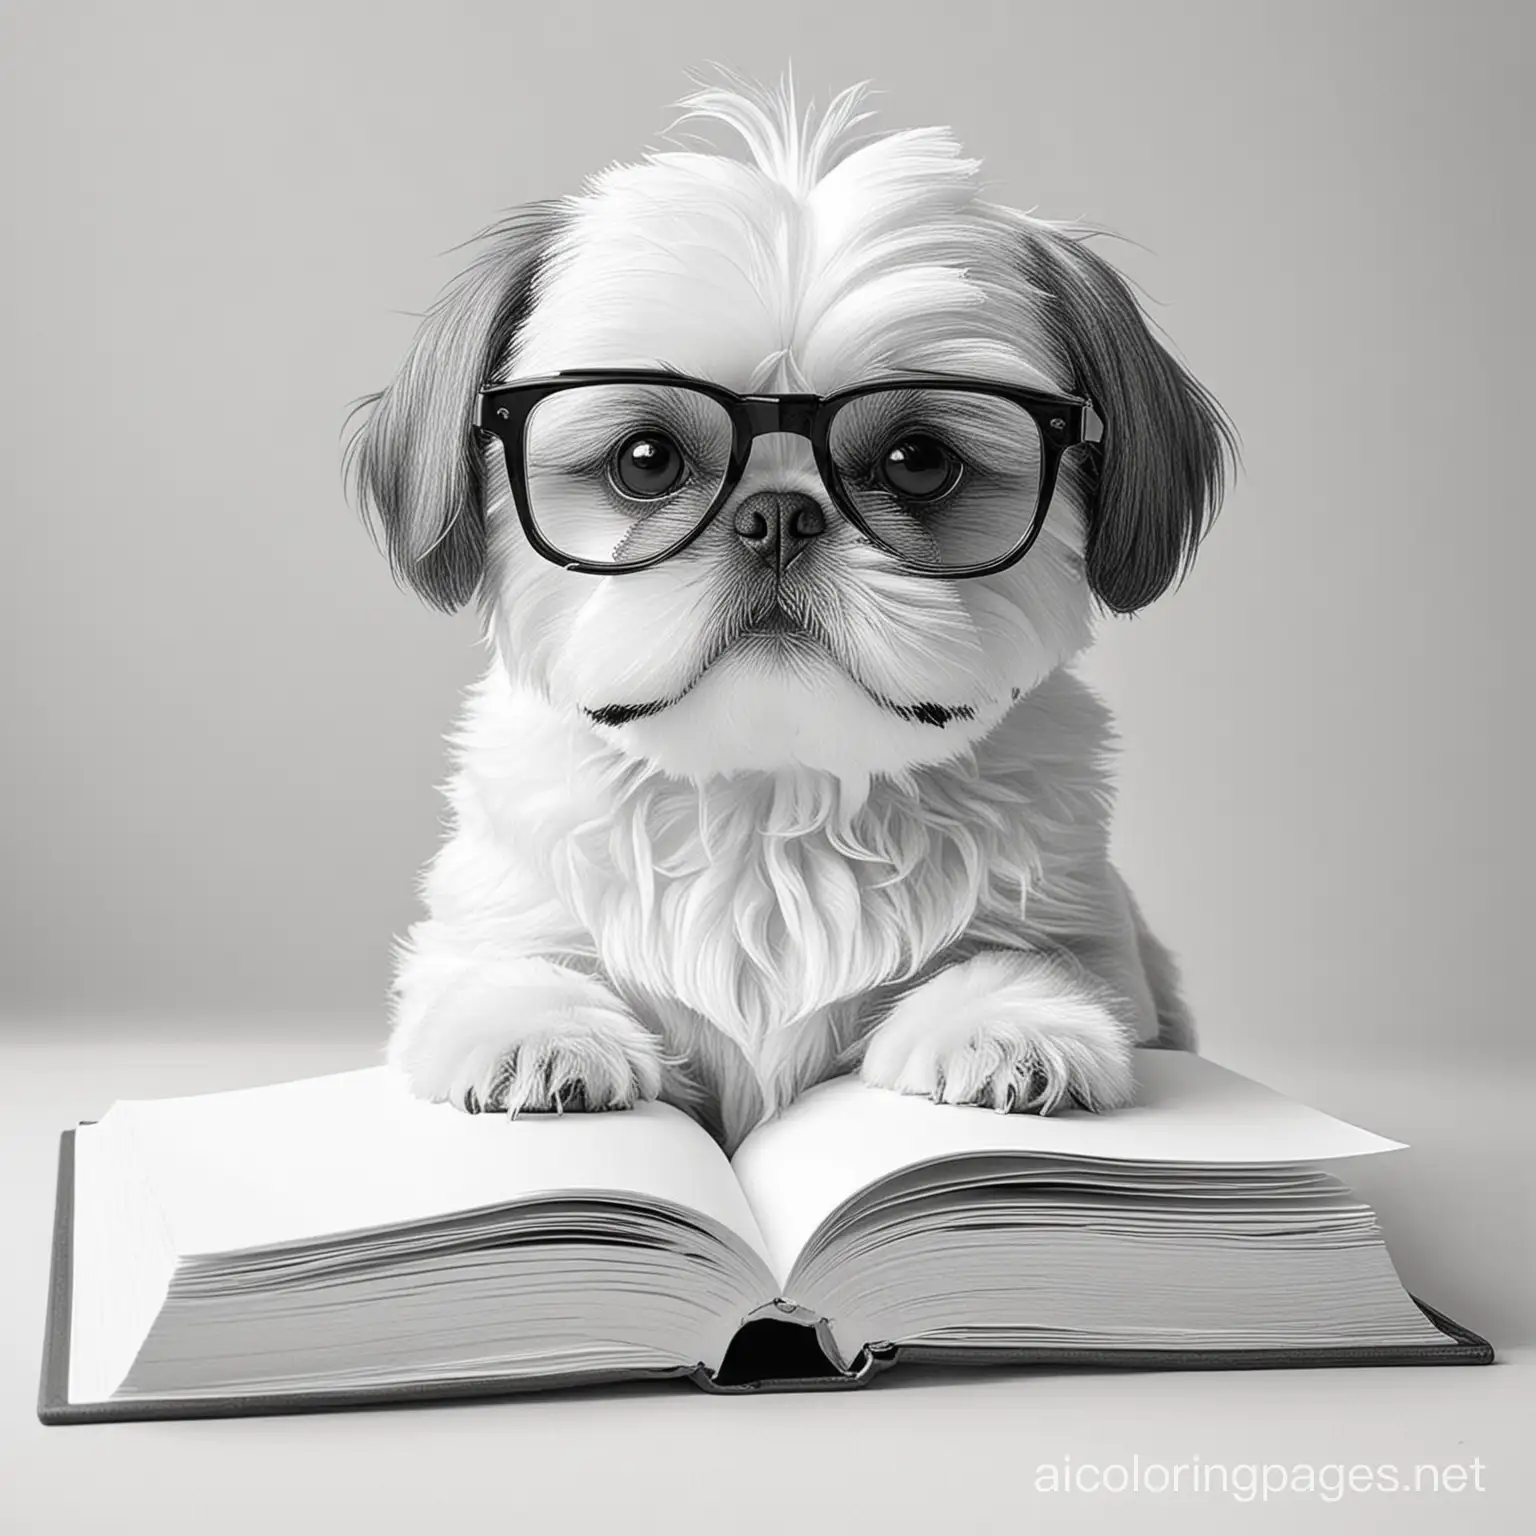 shih tzu with glasses reading book , Coloring Page, black and white, line art, white background, Simplicity, Ample White Space. The background of the coloring page is plain white to make it easy for young children to color within the lines. The outlines of all the subjects are easy to distinguish, making it simple for kids to color without too much difficulty